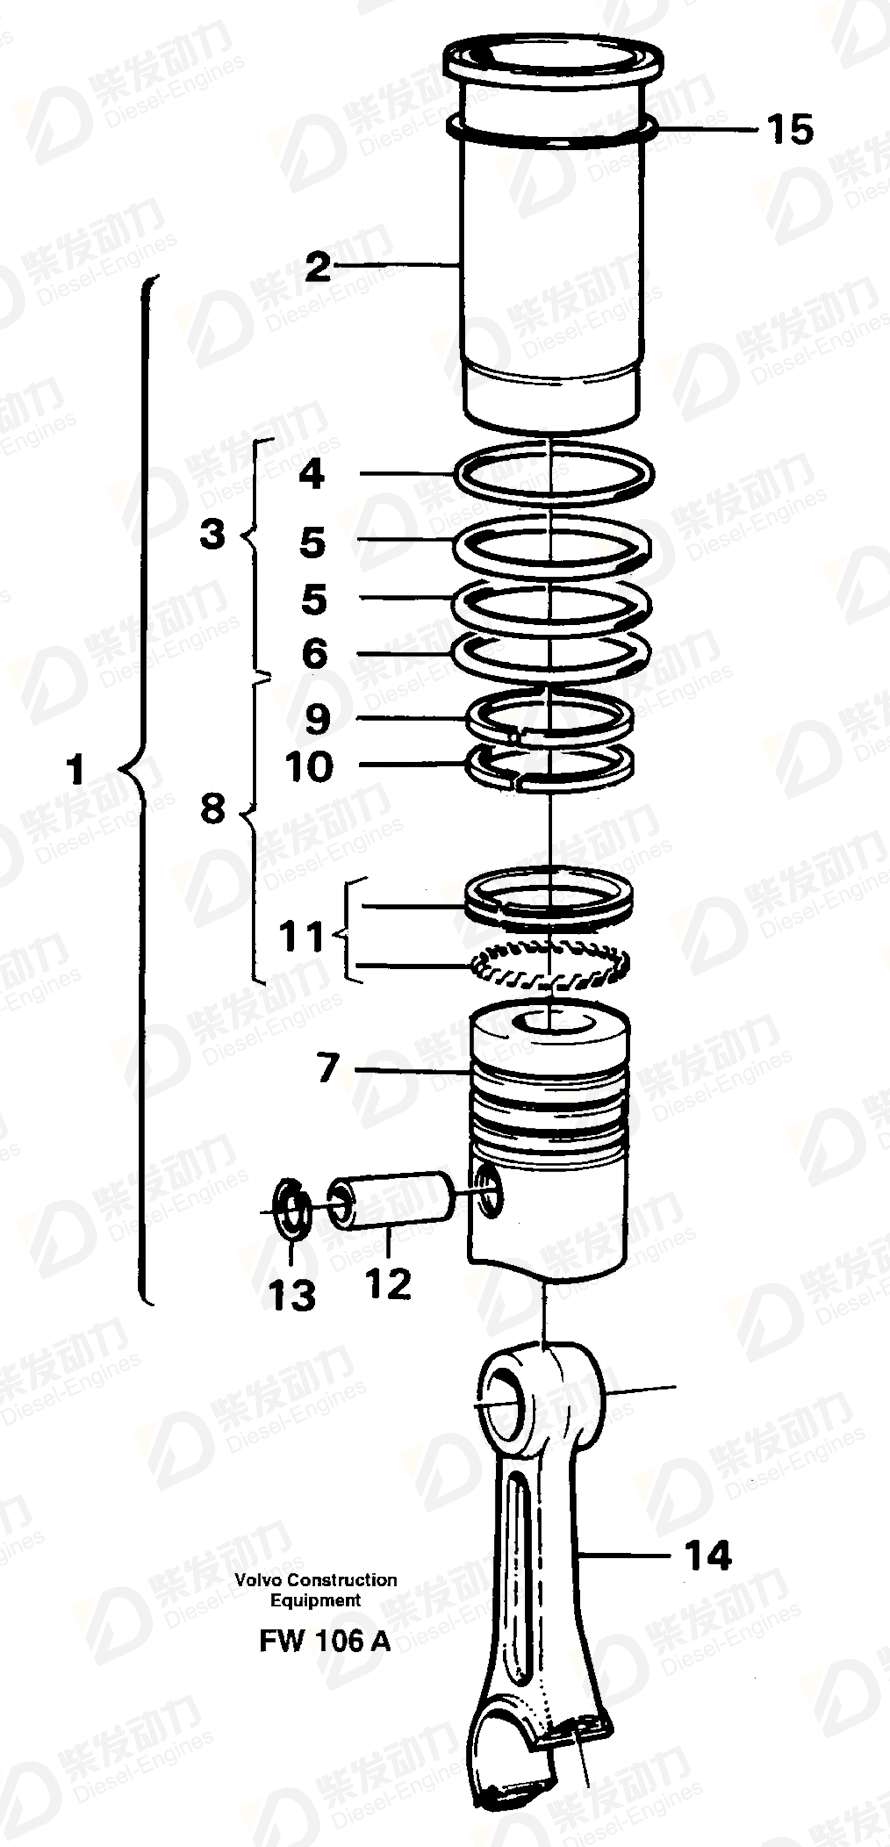 VOLVO Oil ring 477493 Drawing